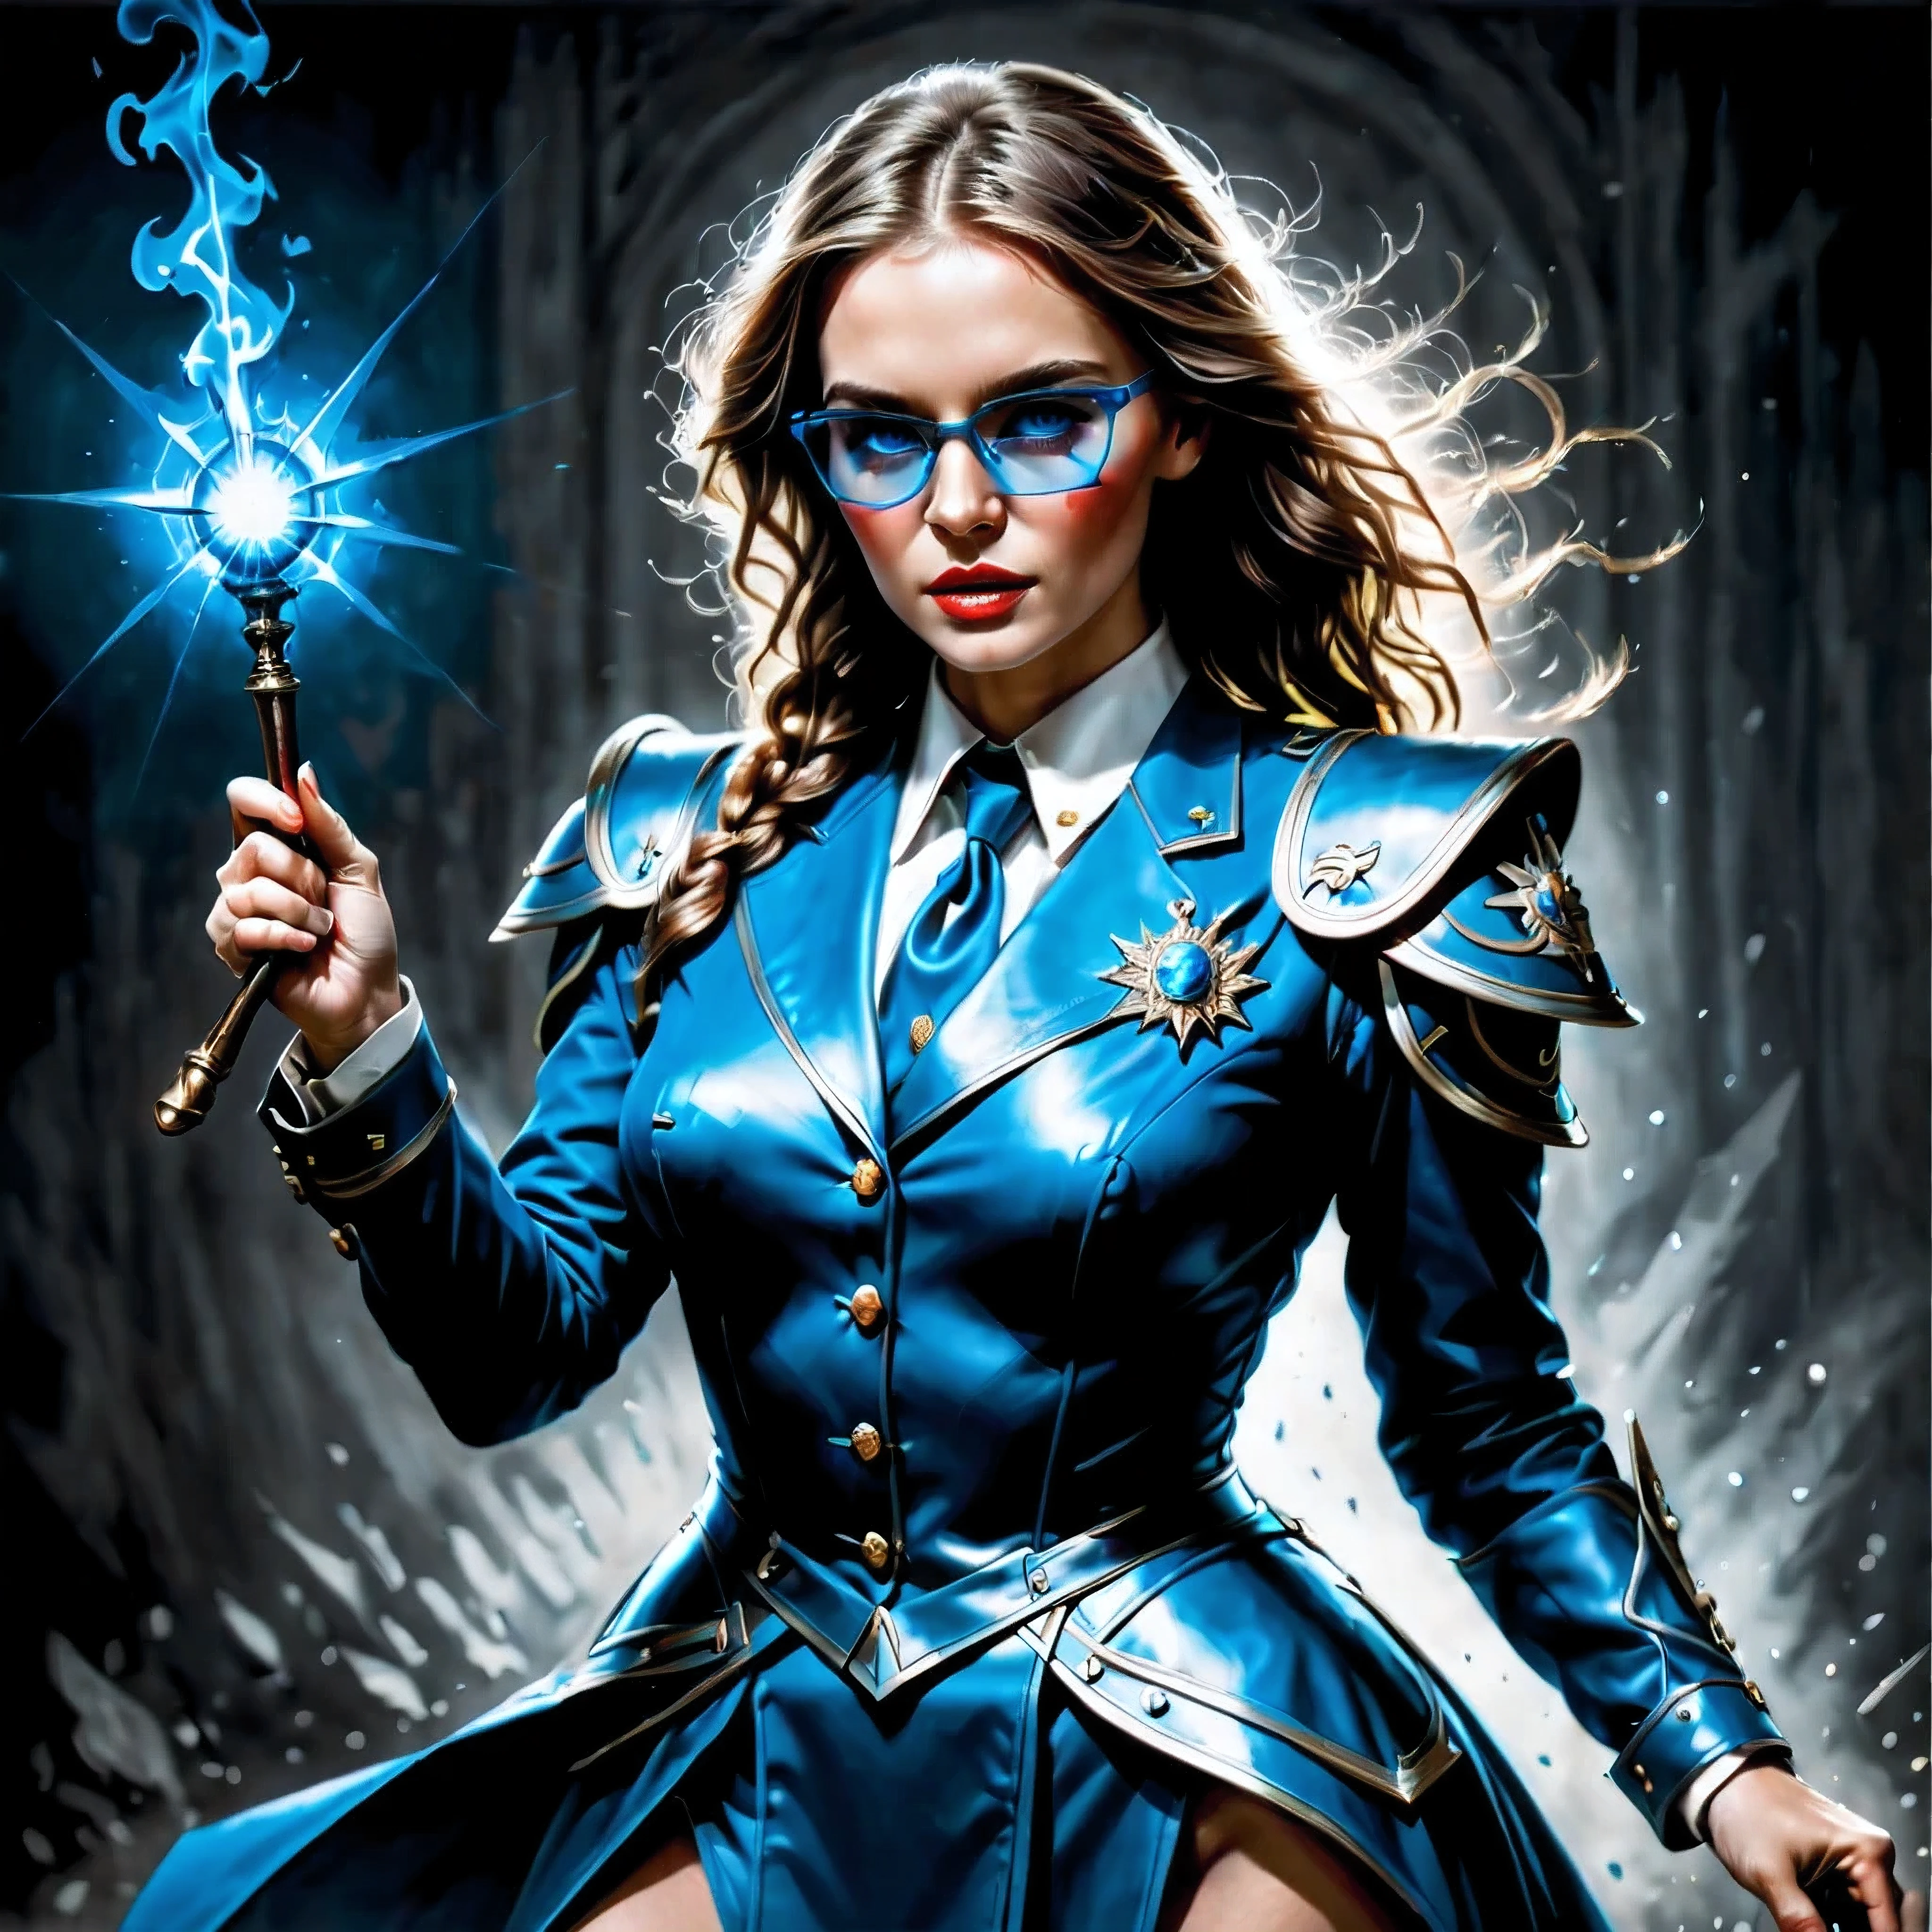 ((Full body):1.2),((Selective color):1.1), Drawing of a Female Bureaucrat in her Official Uniform, Glasses, magic wand with blue glow, smooth lines, fine art piece, Express expressions and postures through ink contrast, emphasize light, shadow and space. figurative art, (best quality, 4K, 8k, high resolution,masterpiece:1.2) ,(actual, photoactual, photo-actual:1.37).